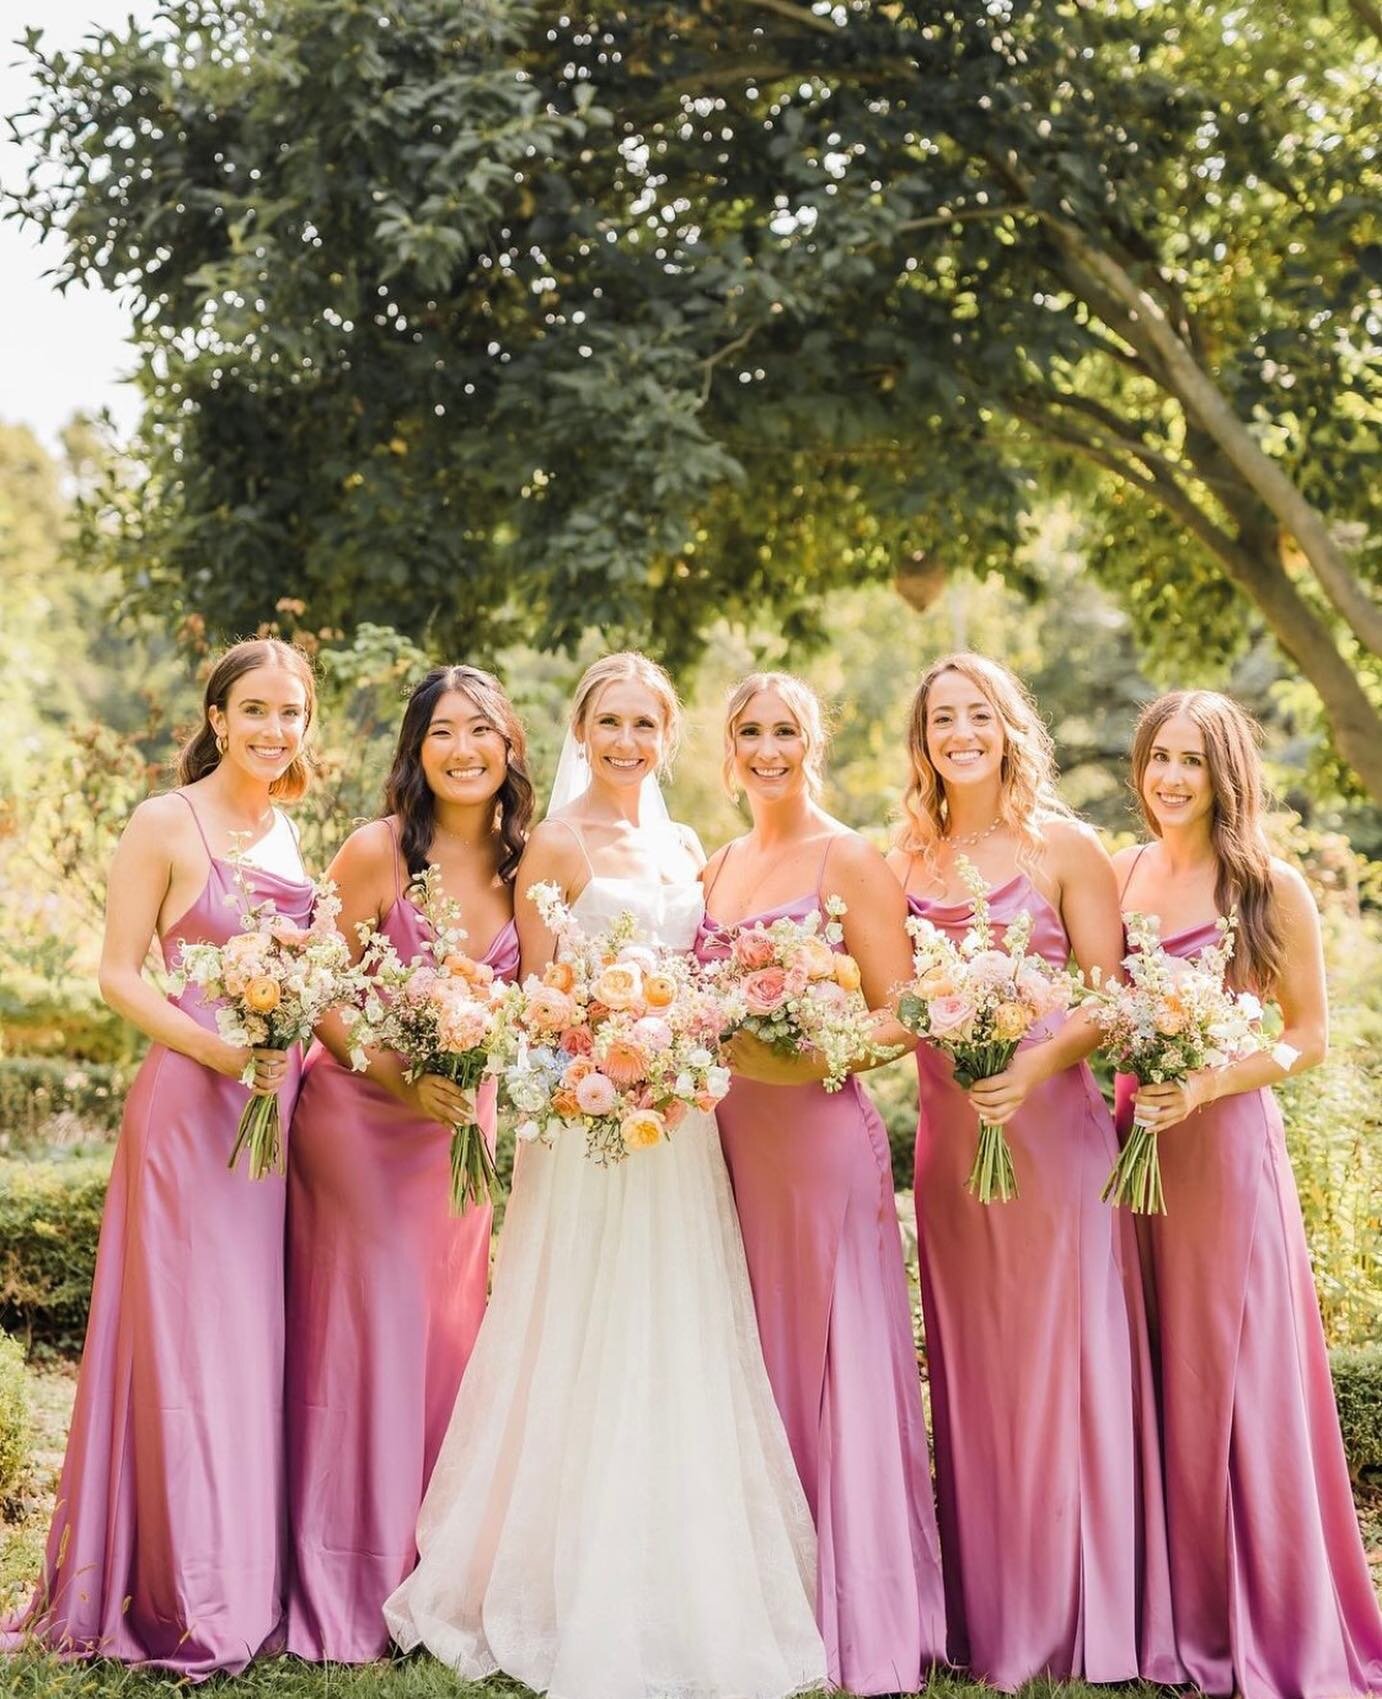 The group shots 📸  are our favorite 🎞

Hair + Makeup: @sincerelysomethingborrowed 
Photo:  @whitepearphoto 

Sincerely Something Borrowed | Hamptons 🤍

A Hamptons based hair + makeup team
For an out East Bride &mdash; based out of The Hamptons 🌊 